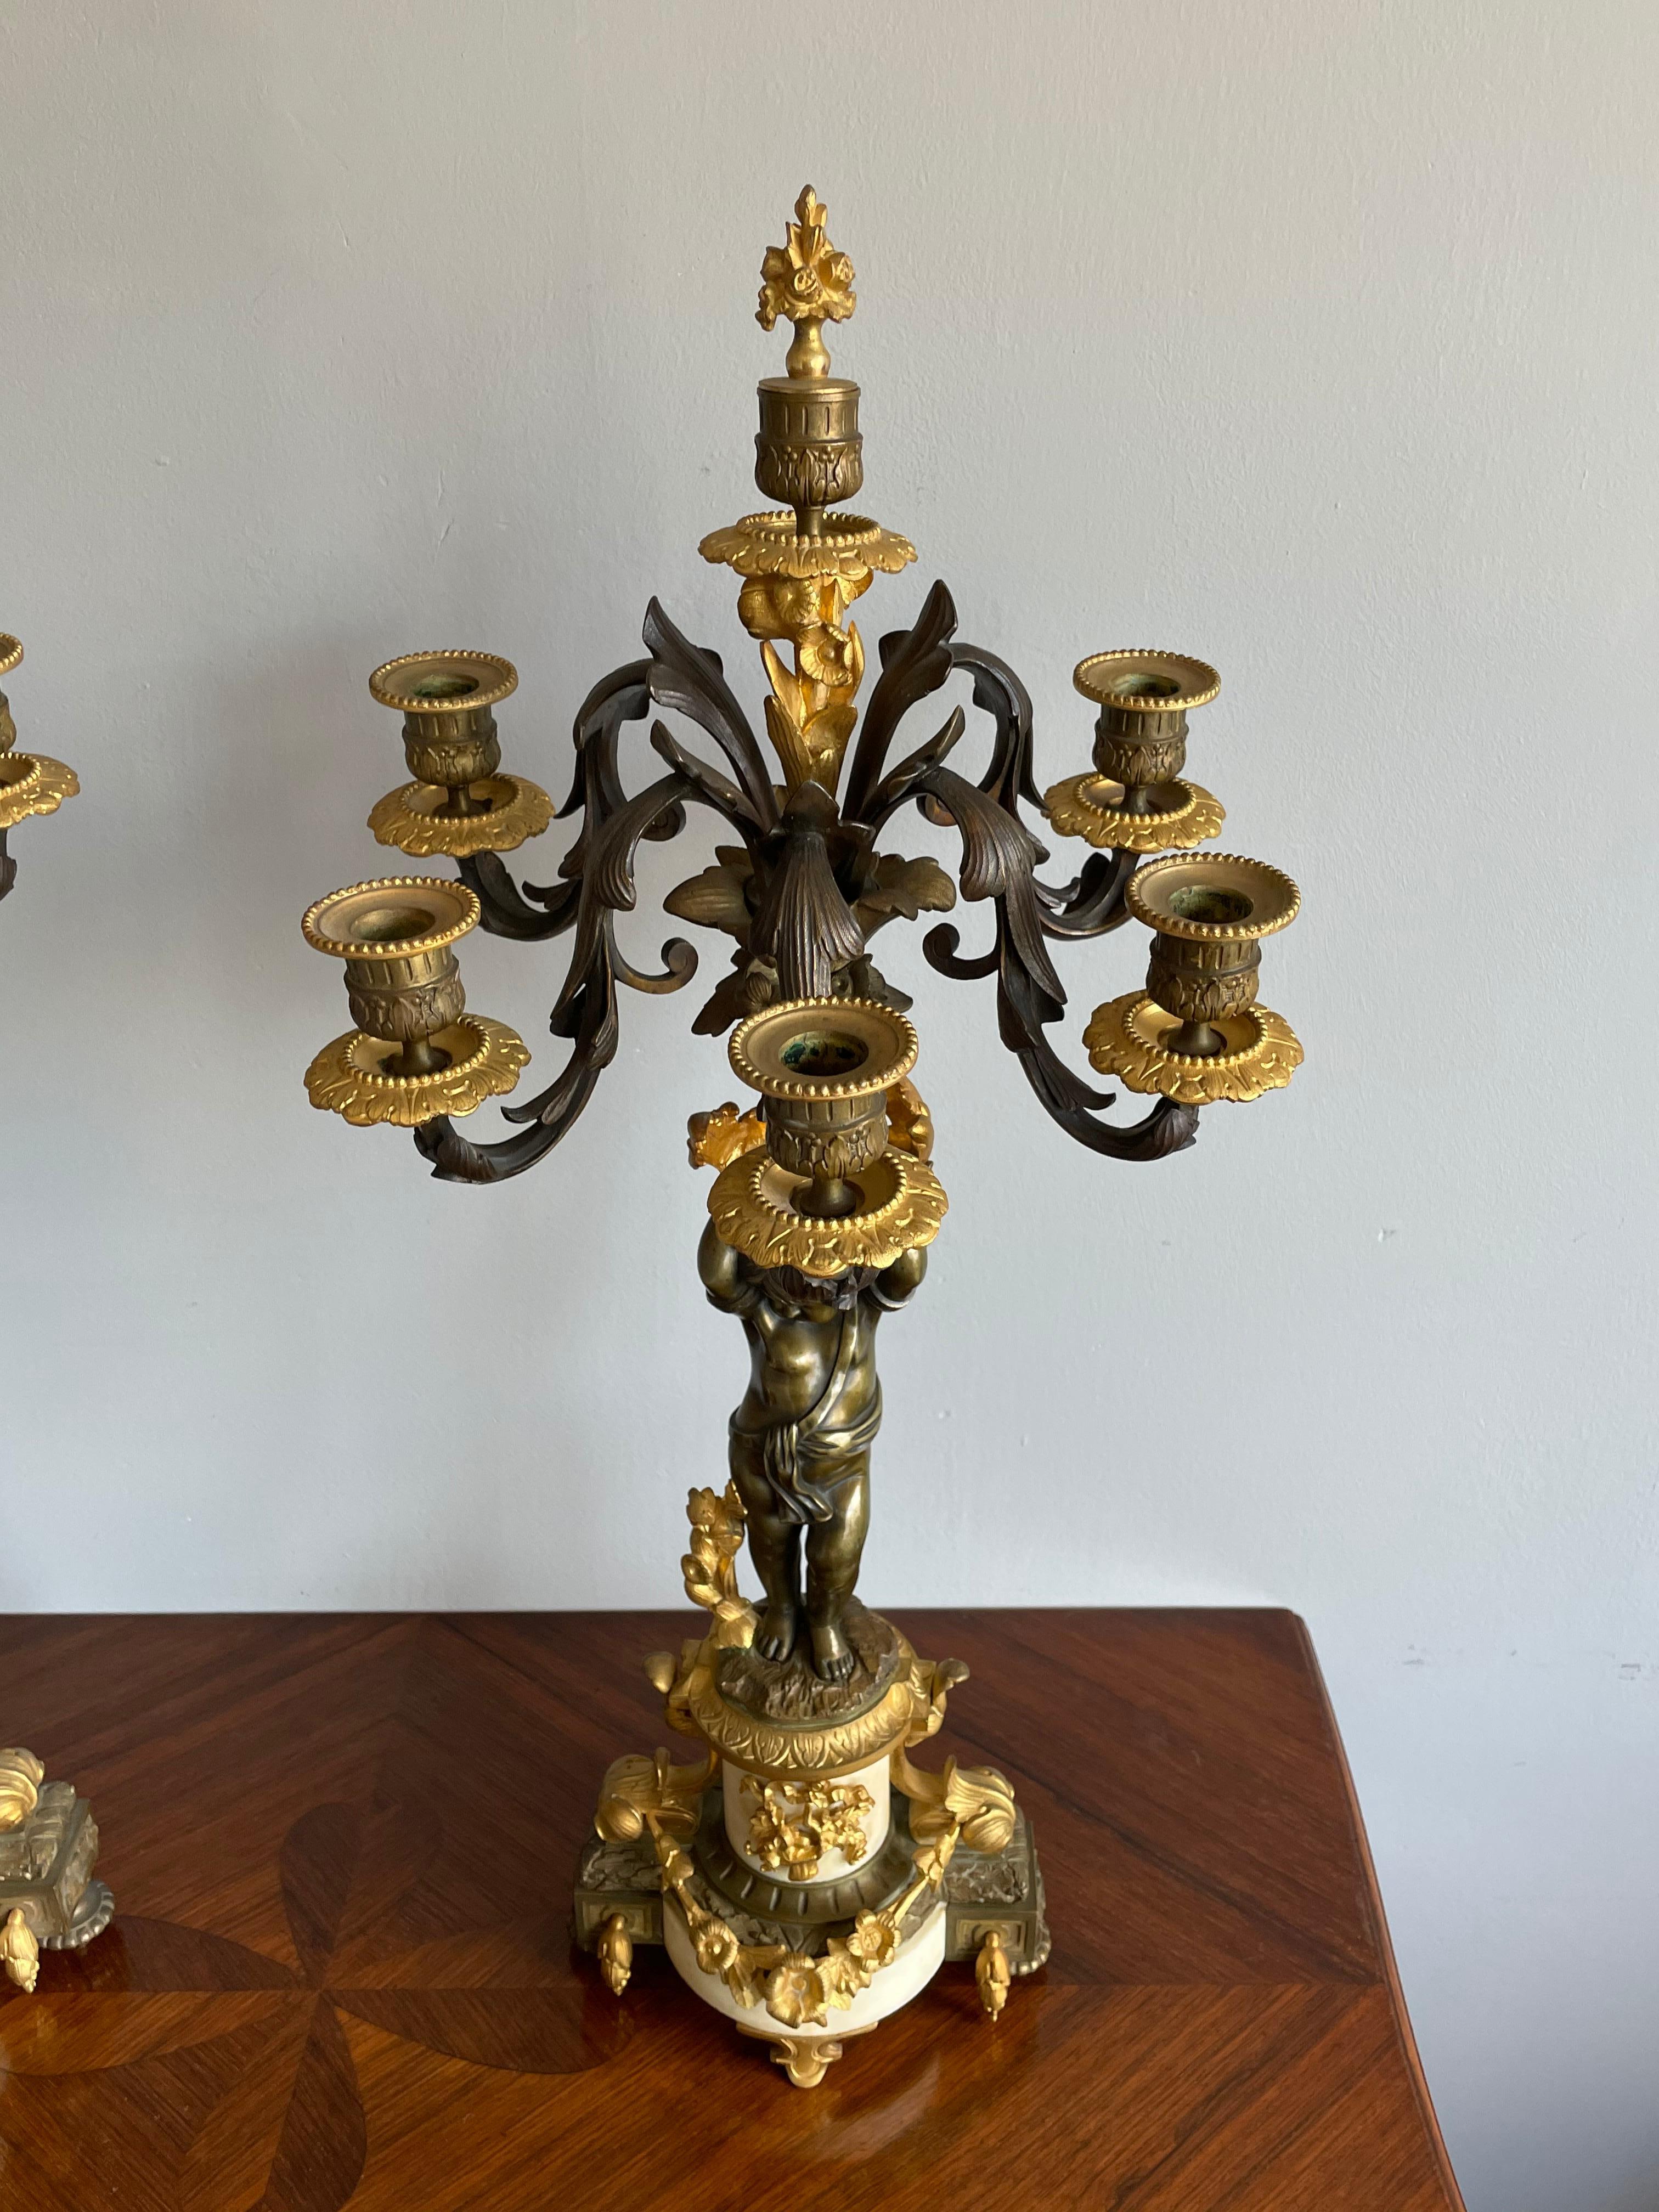 Stunning Pair of French Louis XVI Style Gilt Bronze & Marble Candle Candelabras For Sale 3